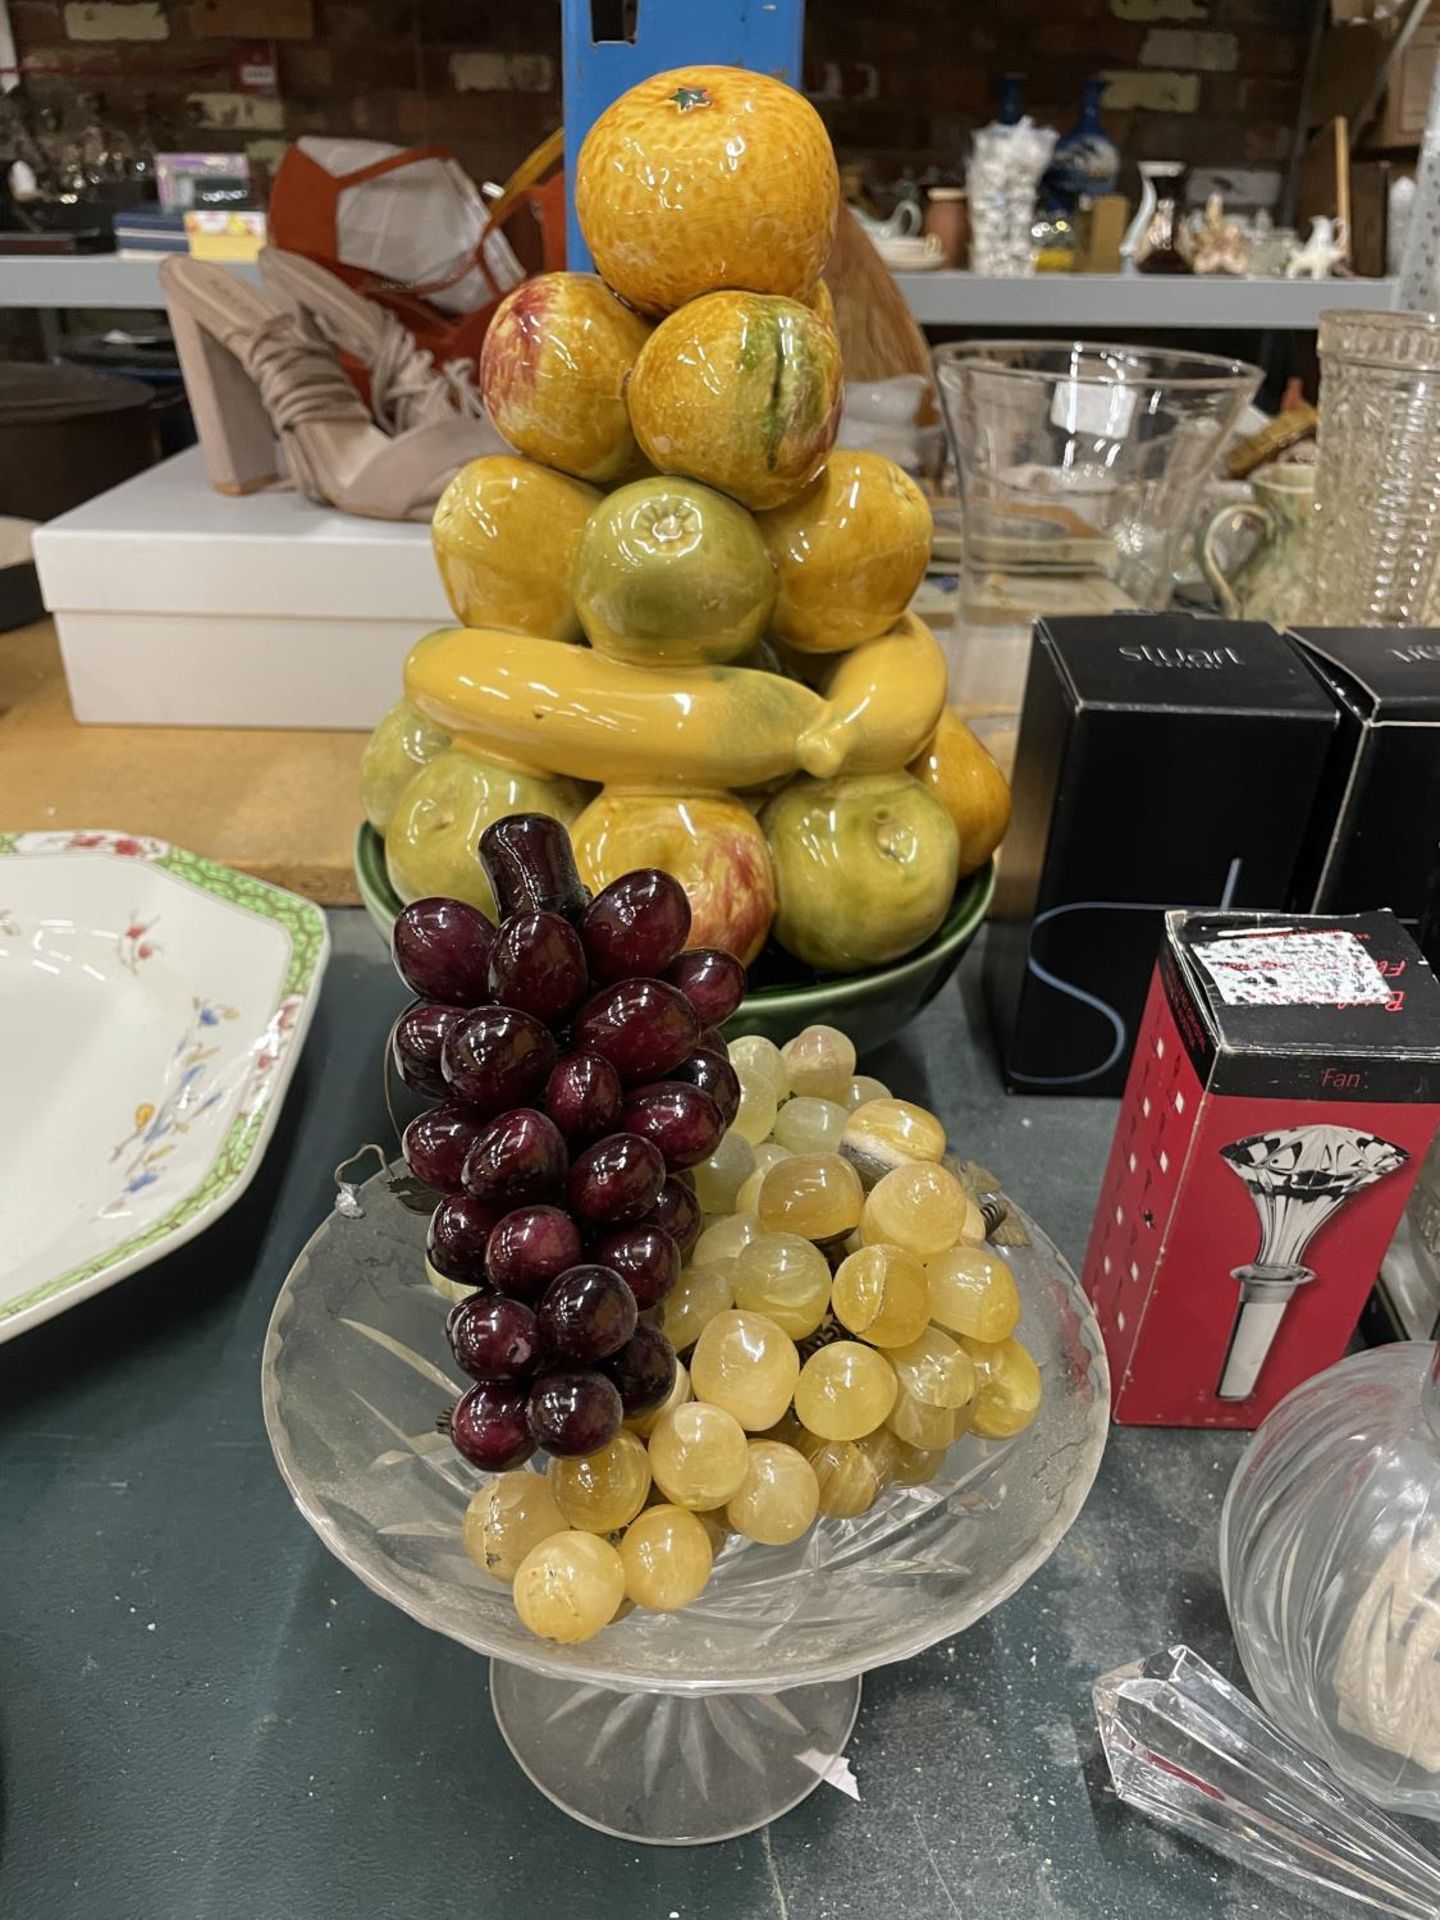 A VINTAGE BOWL OF CERAMIC FRUIT, A GLASS FOOTED BOWL AND THREE BUNCHES OF GLASS GRAPES